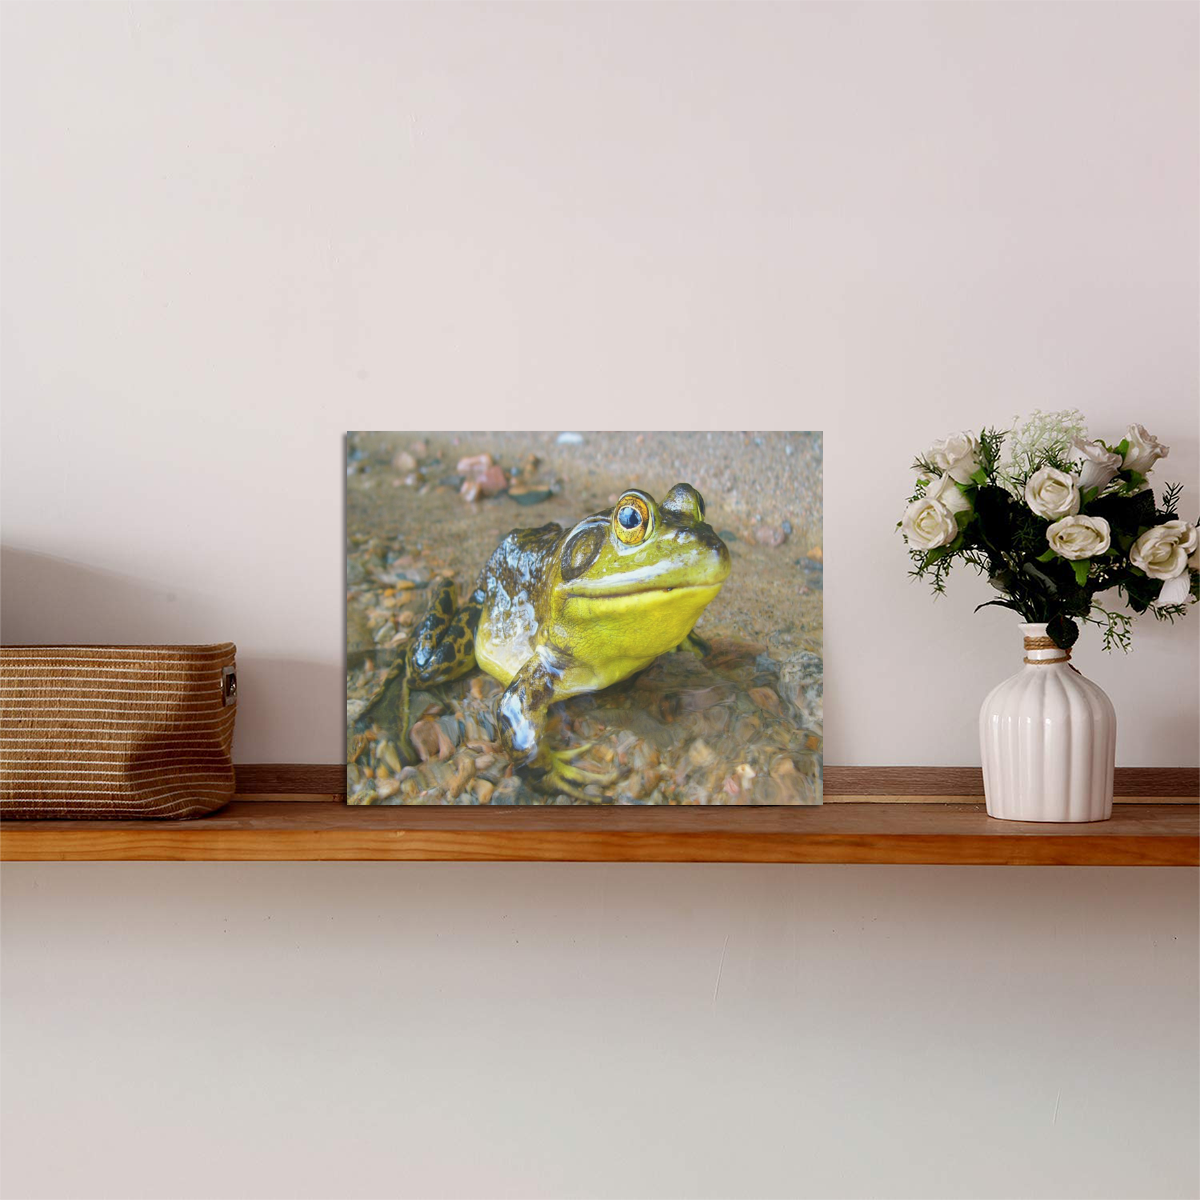 Green Frog Adventure Photo Panel for Tabletop Display 8"x6"